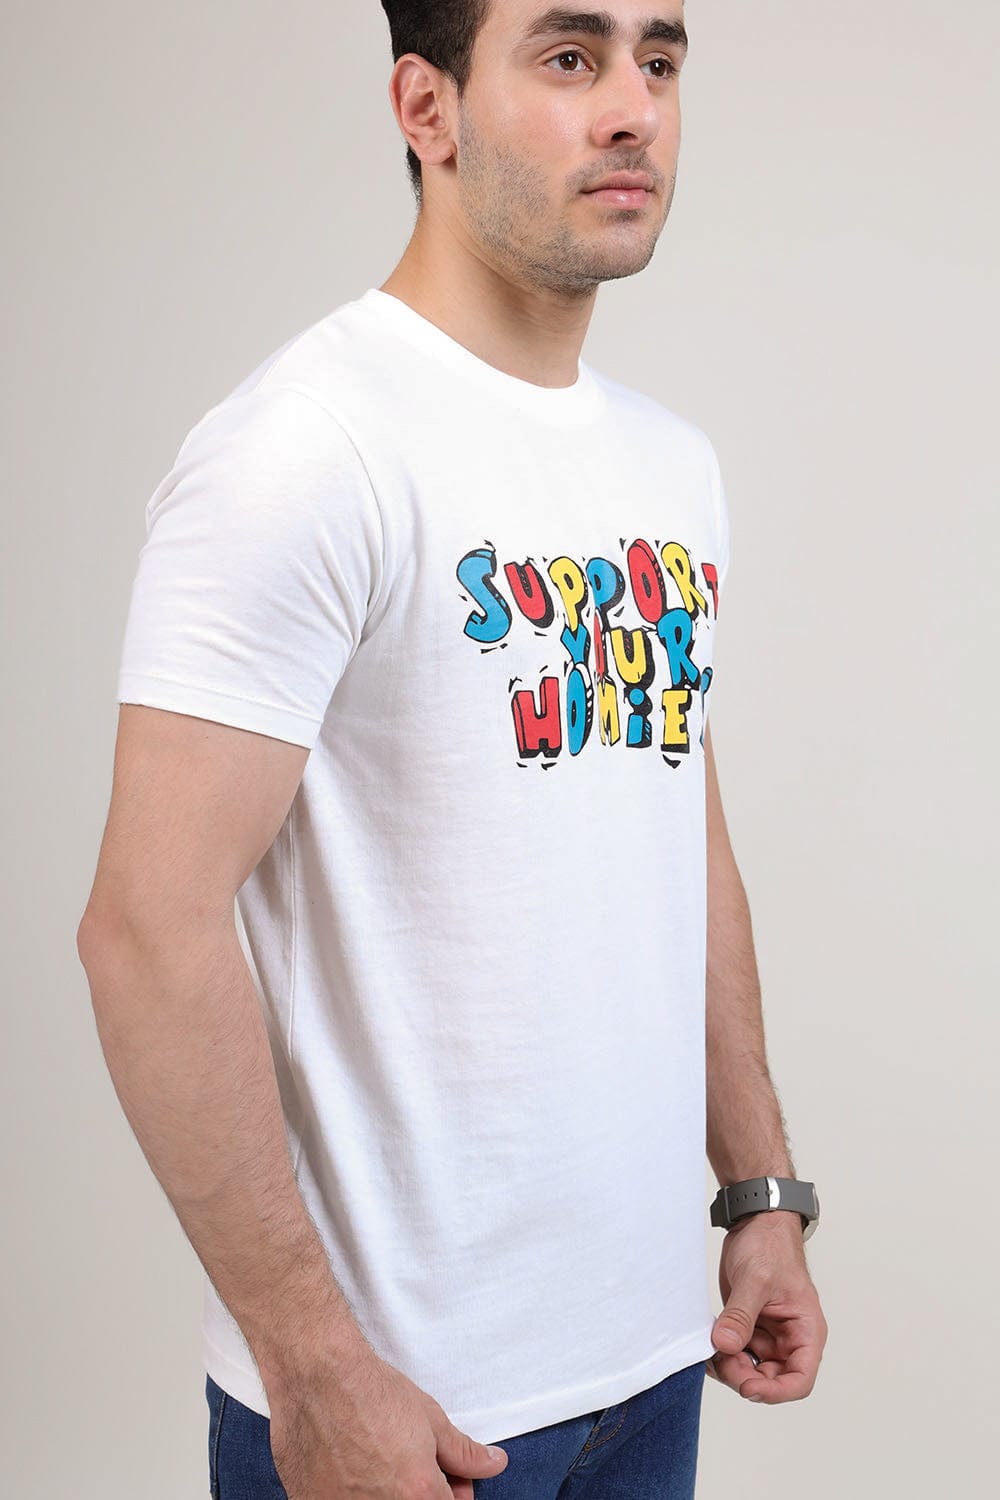 Hope Not Out by Shahid Afridi Men T-Shirt Homies Support White Tee for Men